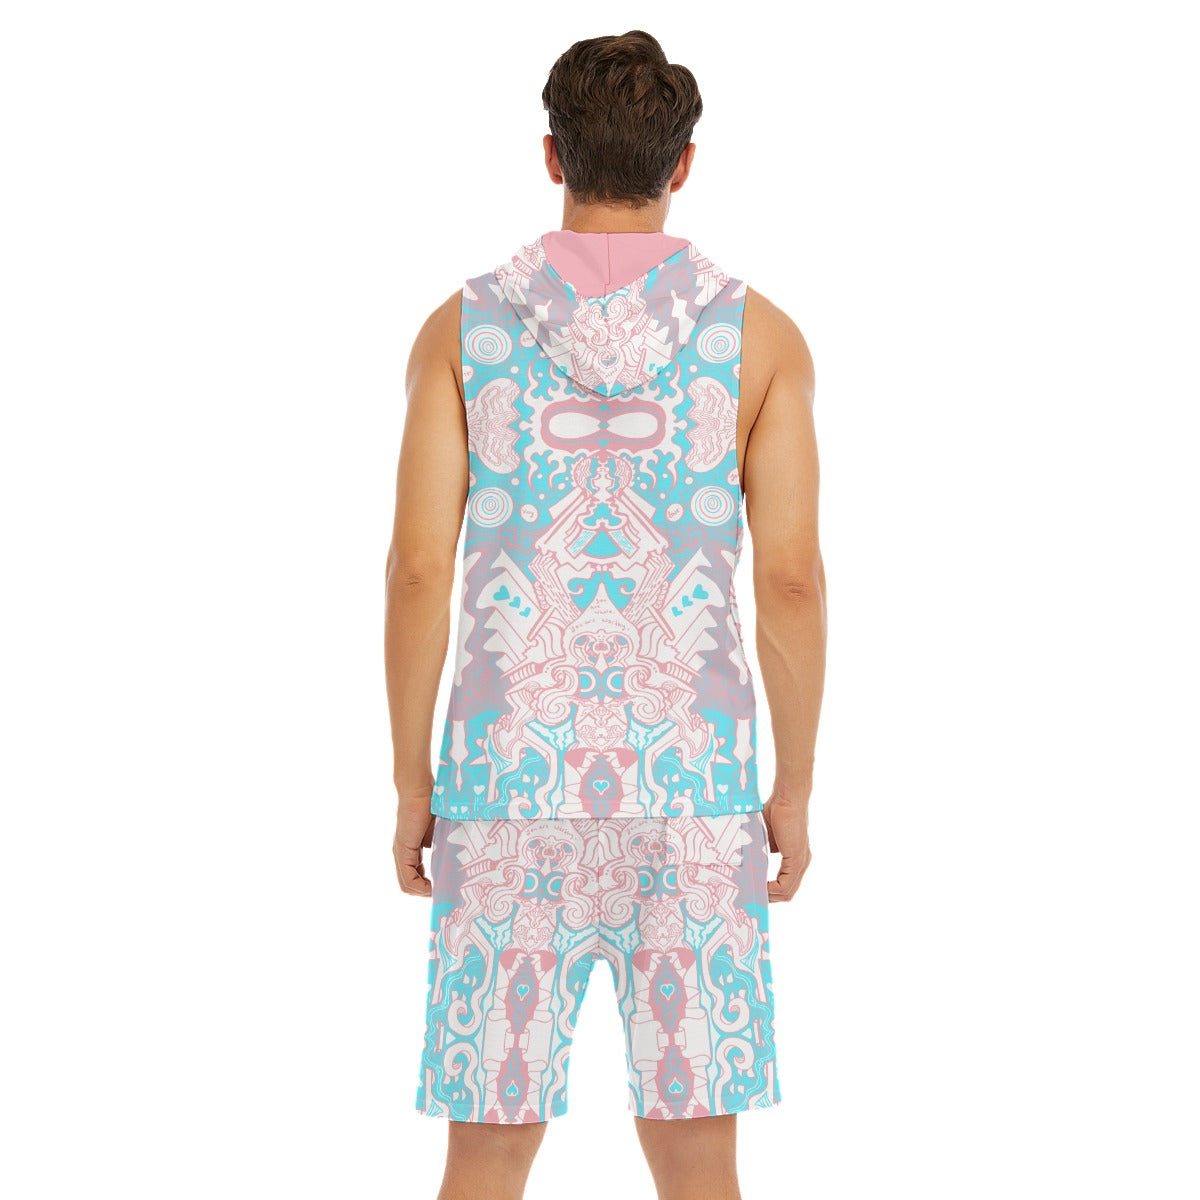 All-Over Print Men's Sleeveless Vest And Shorts Sets